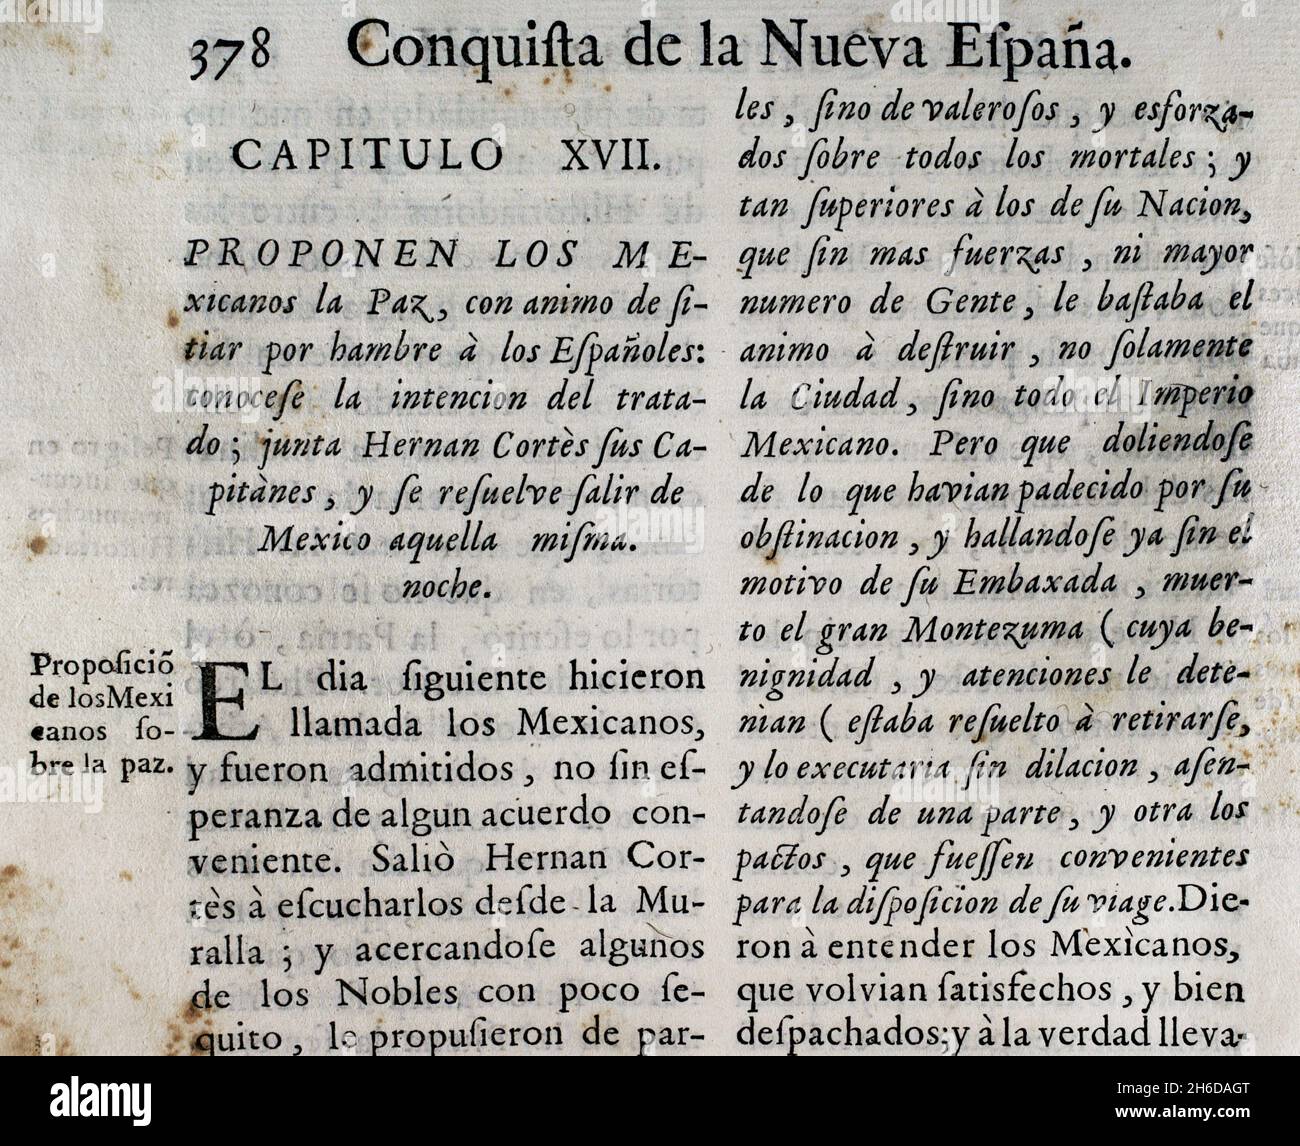 Conquest of New Spain. The Mexicans propose peace, with the intention of besieging the Spaniards by hunger: the plan of the treaty is known; Hernán Cortes gathers his captains, and decides to leave Mexico that same night. 'Historia de la Conquista de México, población, y progresos de la América septentrional, conocida por el nombre de Nueva España' (History of the Conquest of Mexico, population, and progress of northern America, known by the name of New Spain). Written by Antonio de Solís y Rivadeneryra (1610-1686), Chronicler of the Indies. Chapter XVII. Edition published in Barcelona, 1756. Stock Photo